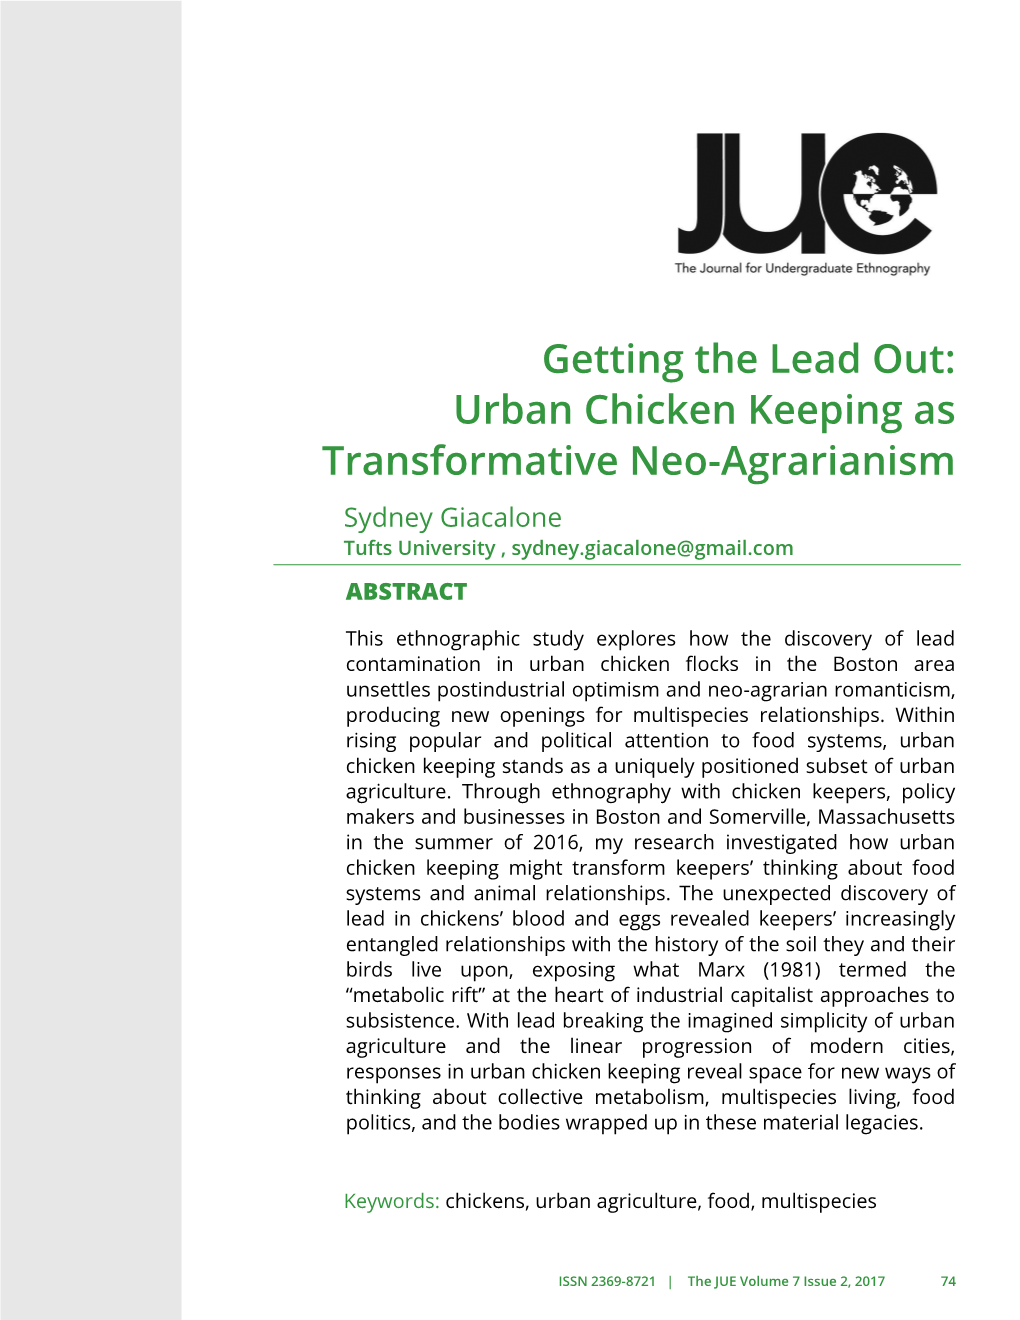 Urban Chicken Keeping As Transformative Neo-Agrarianism Sydney Giacalone Tufts University , Sydney.Giacalone@Gmail.Com ABSTRACT